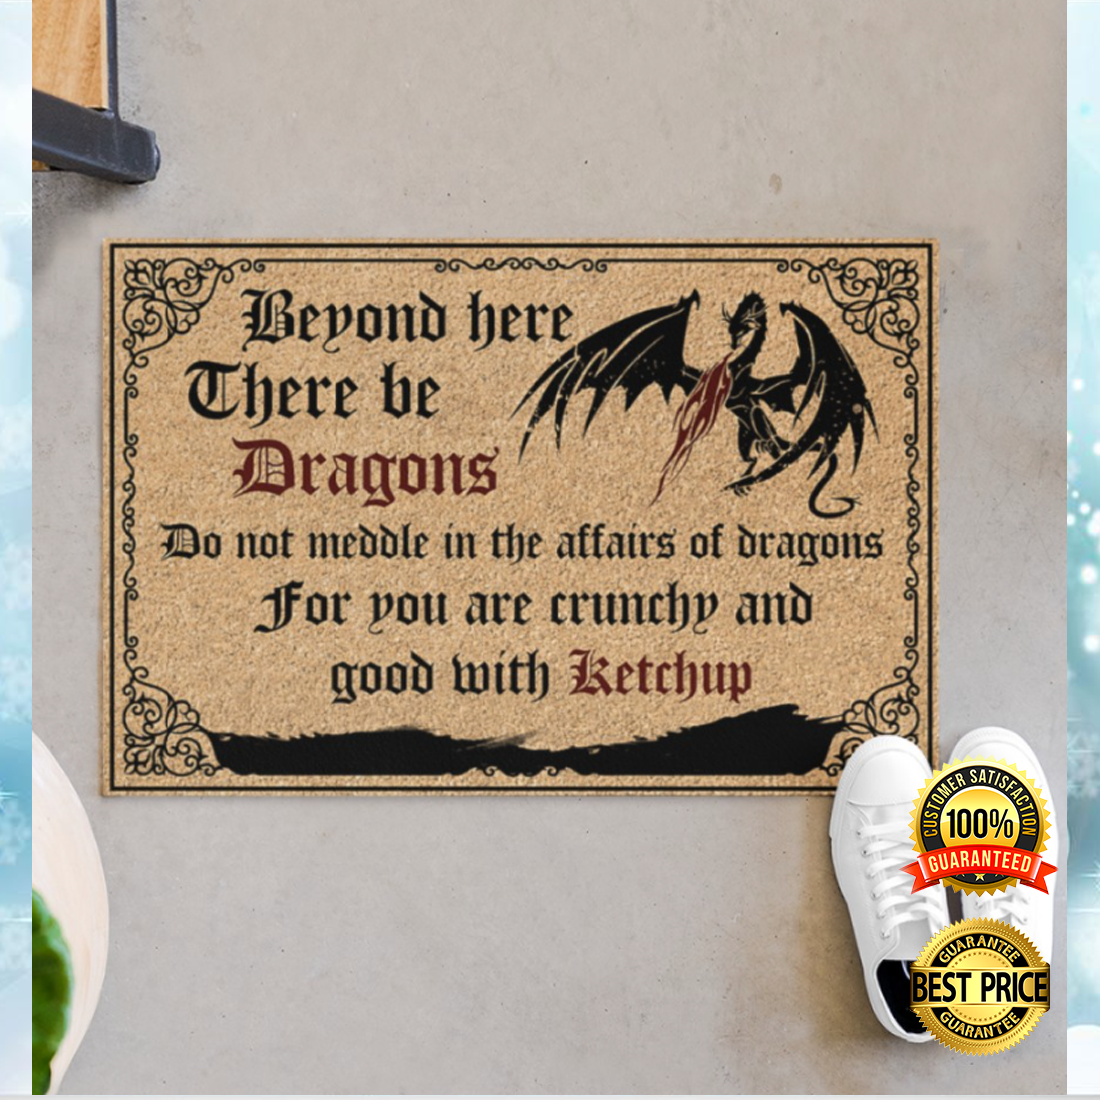 Beyond here there be dragons doormat 5